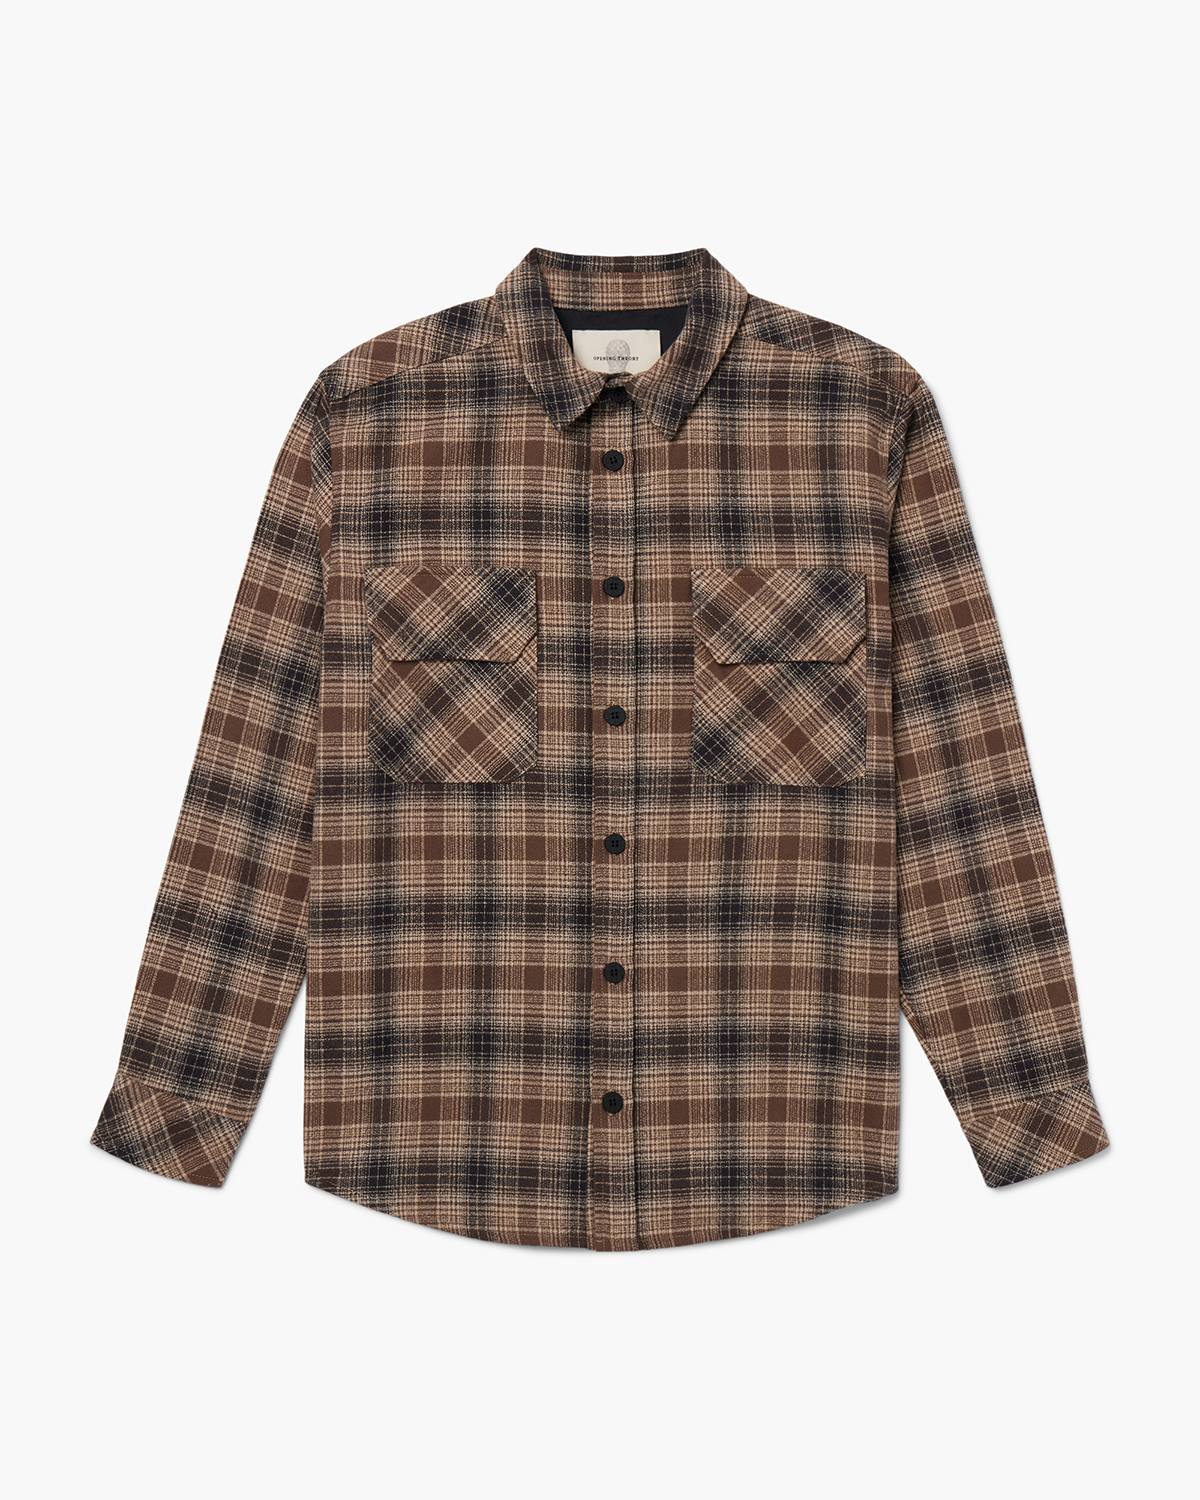 The Wes Flannel In Tonal Umber